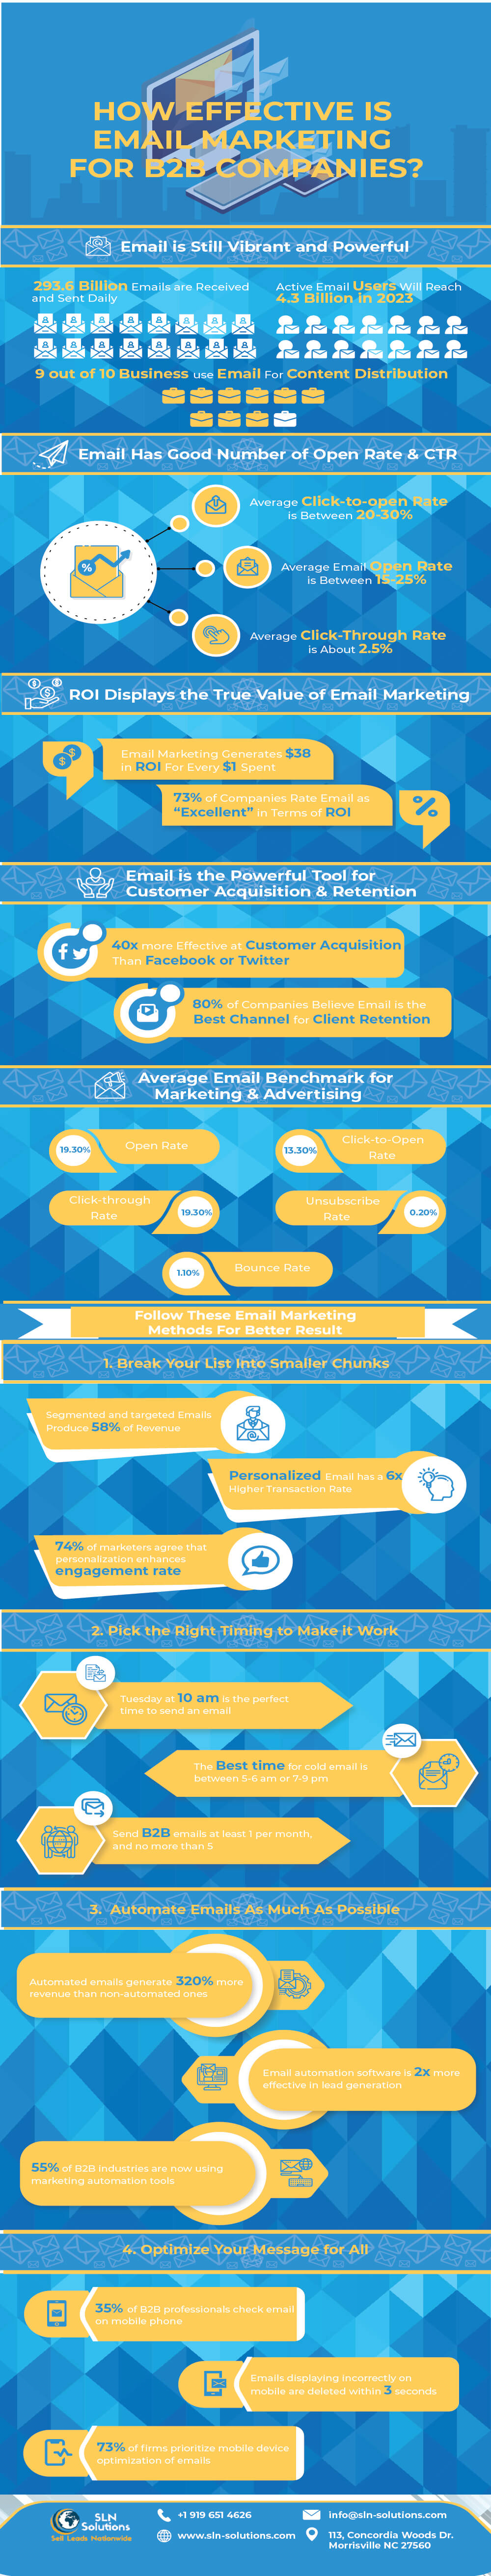 How Effective is Email Marketing for B2B Companies